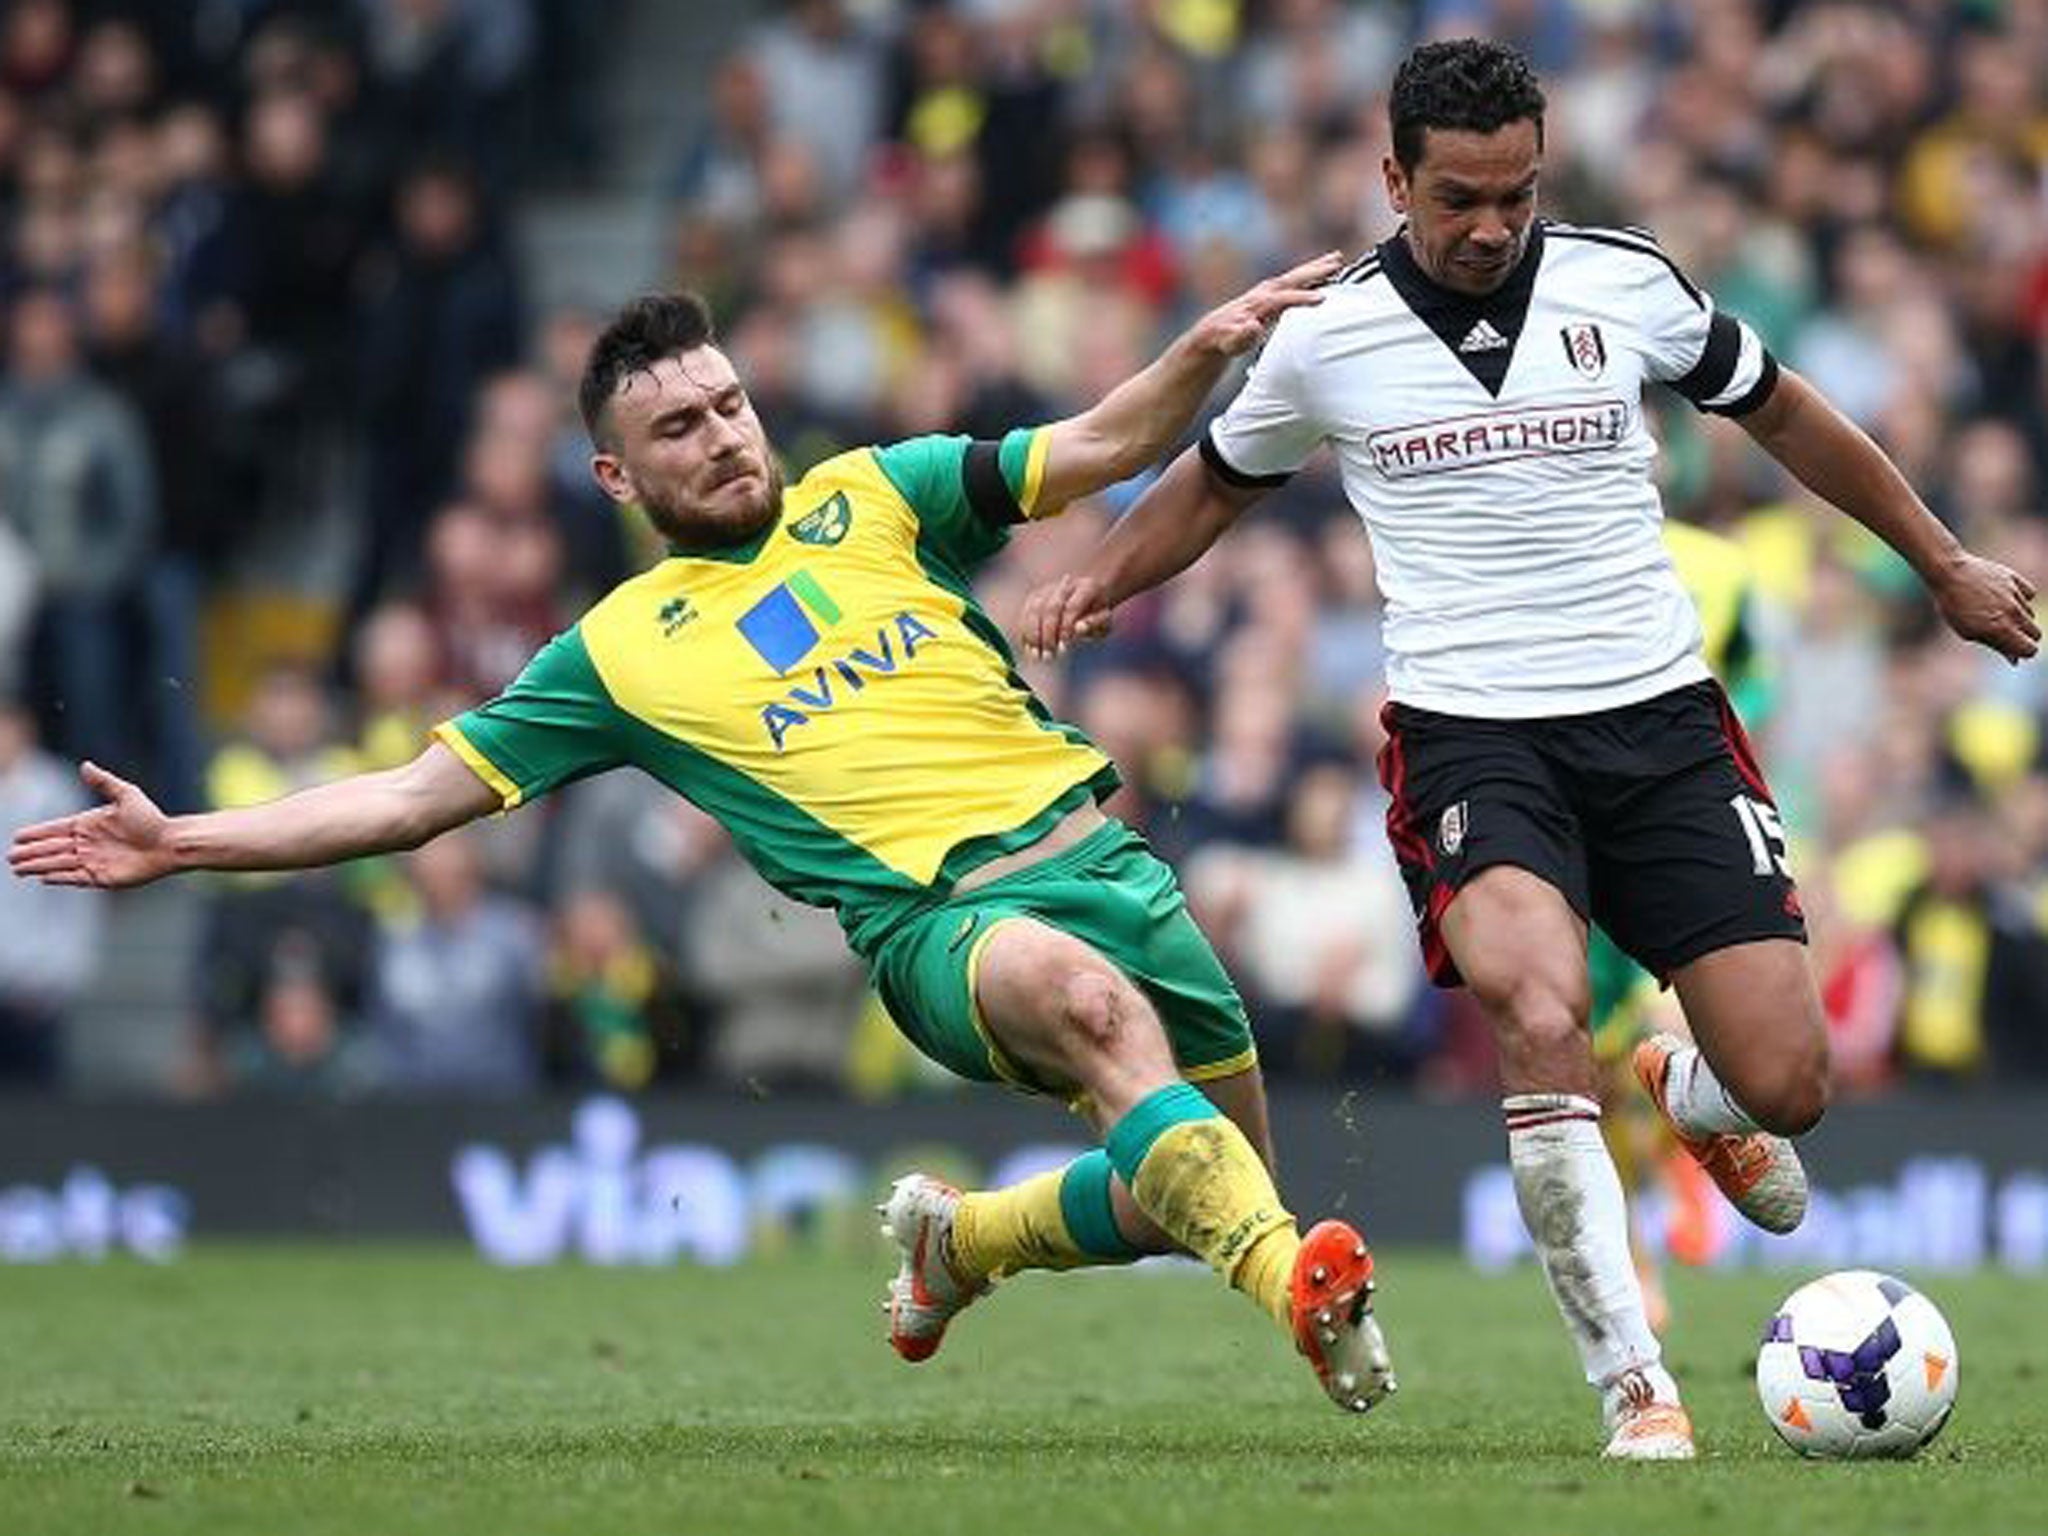 Fulham beat Norwich at the weekend to close the gap on those above them